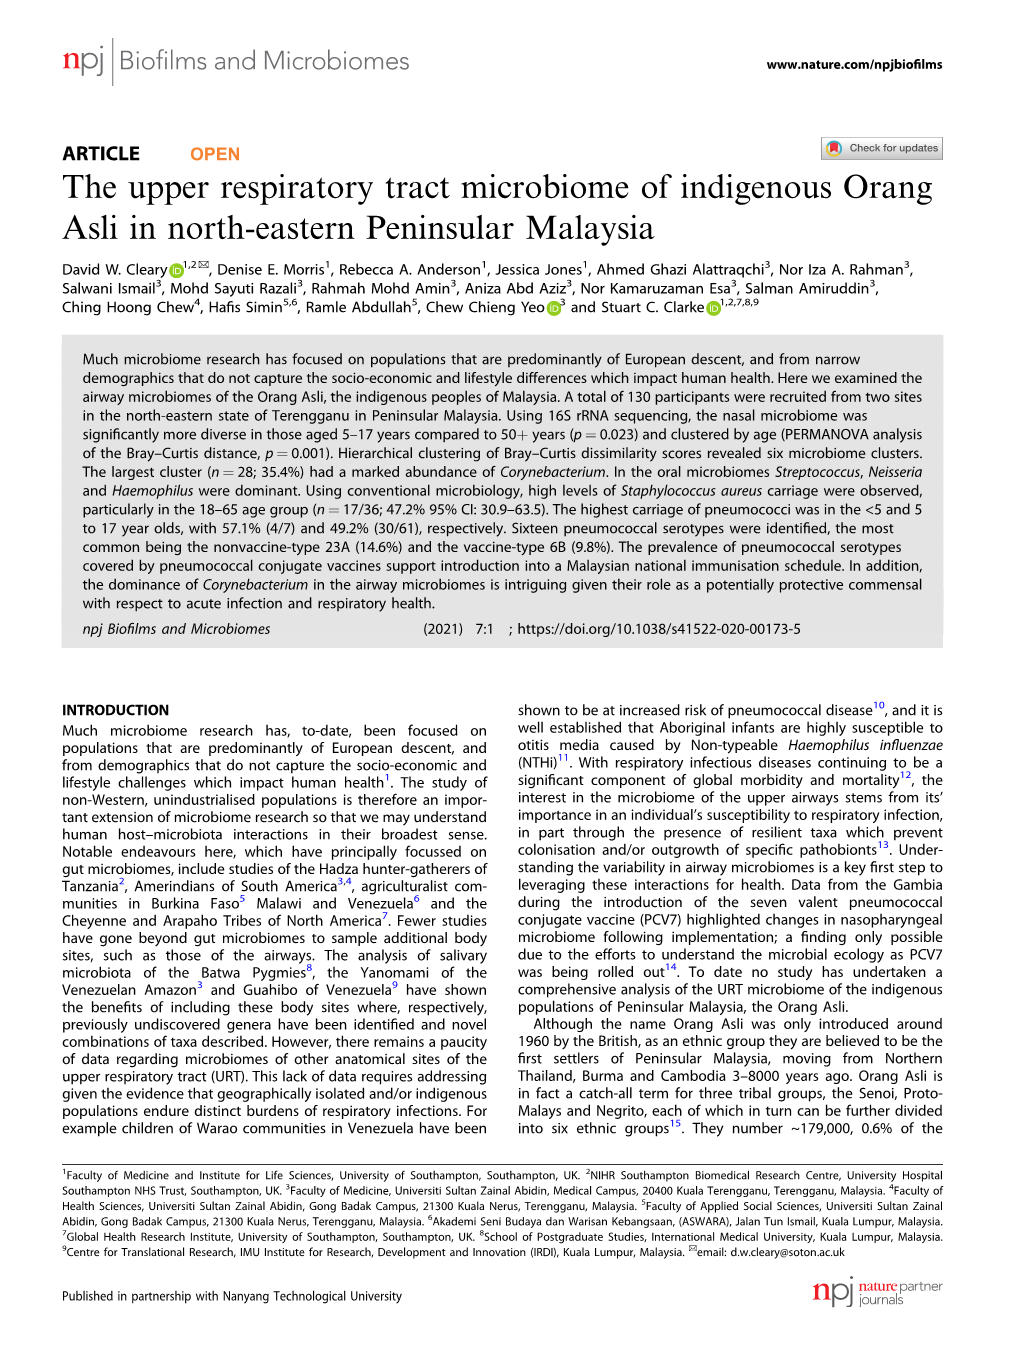 The Upper Respiratory Tract Microbiome of Indigenous Orang Asli in North-Eastern Peninsular Malaysia ✉ David W